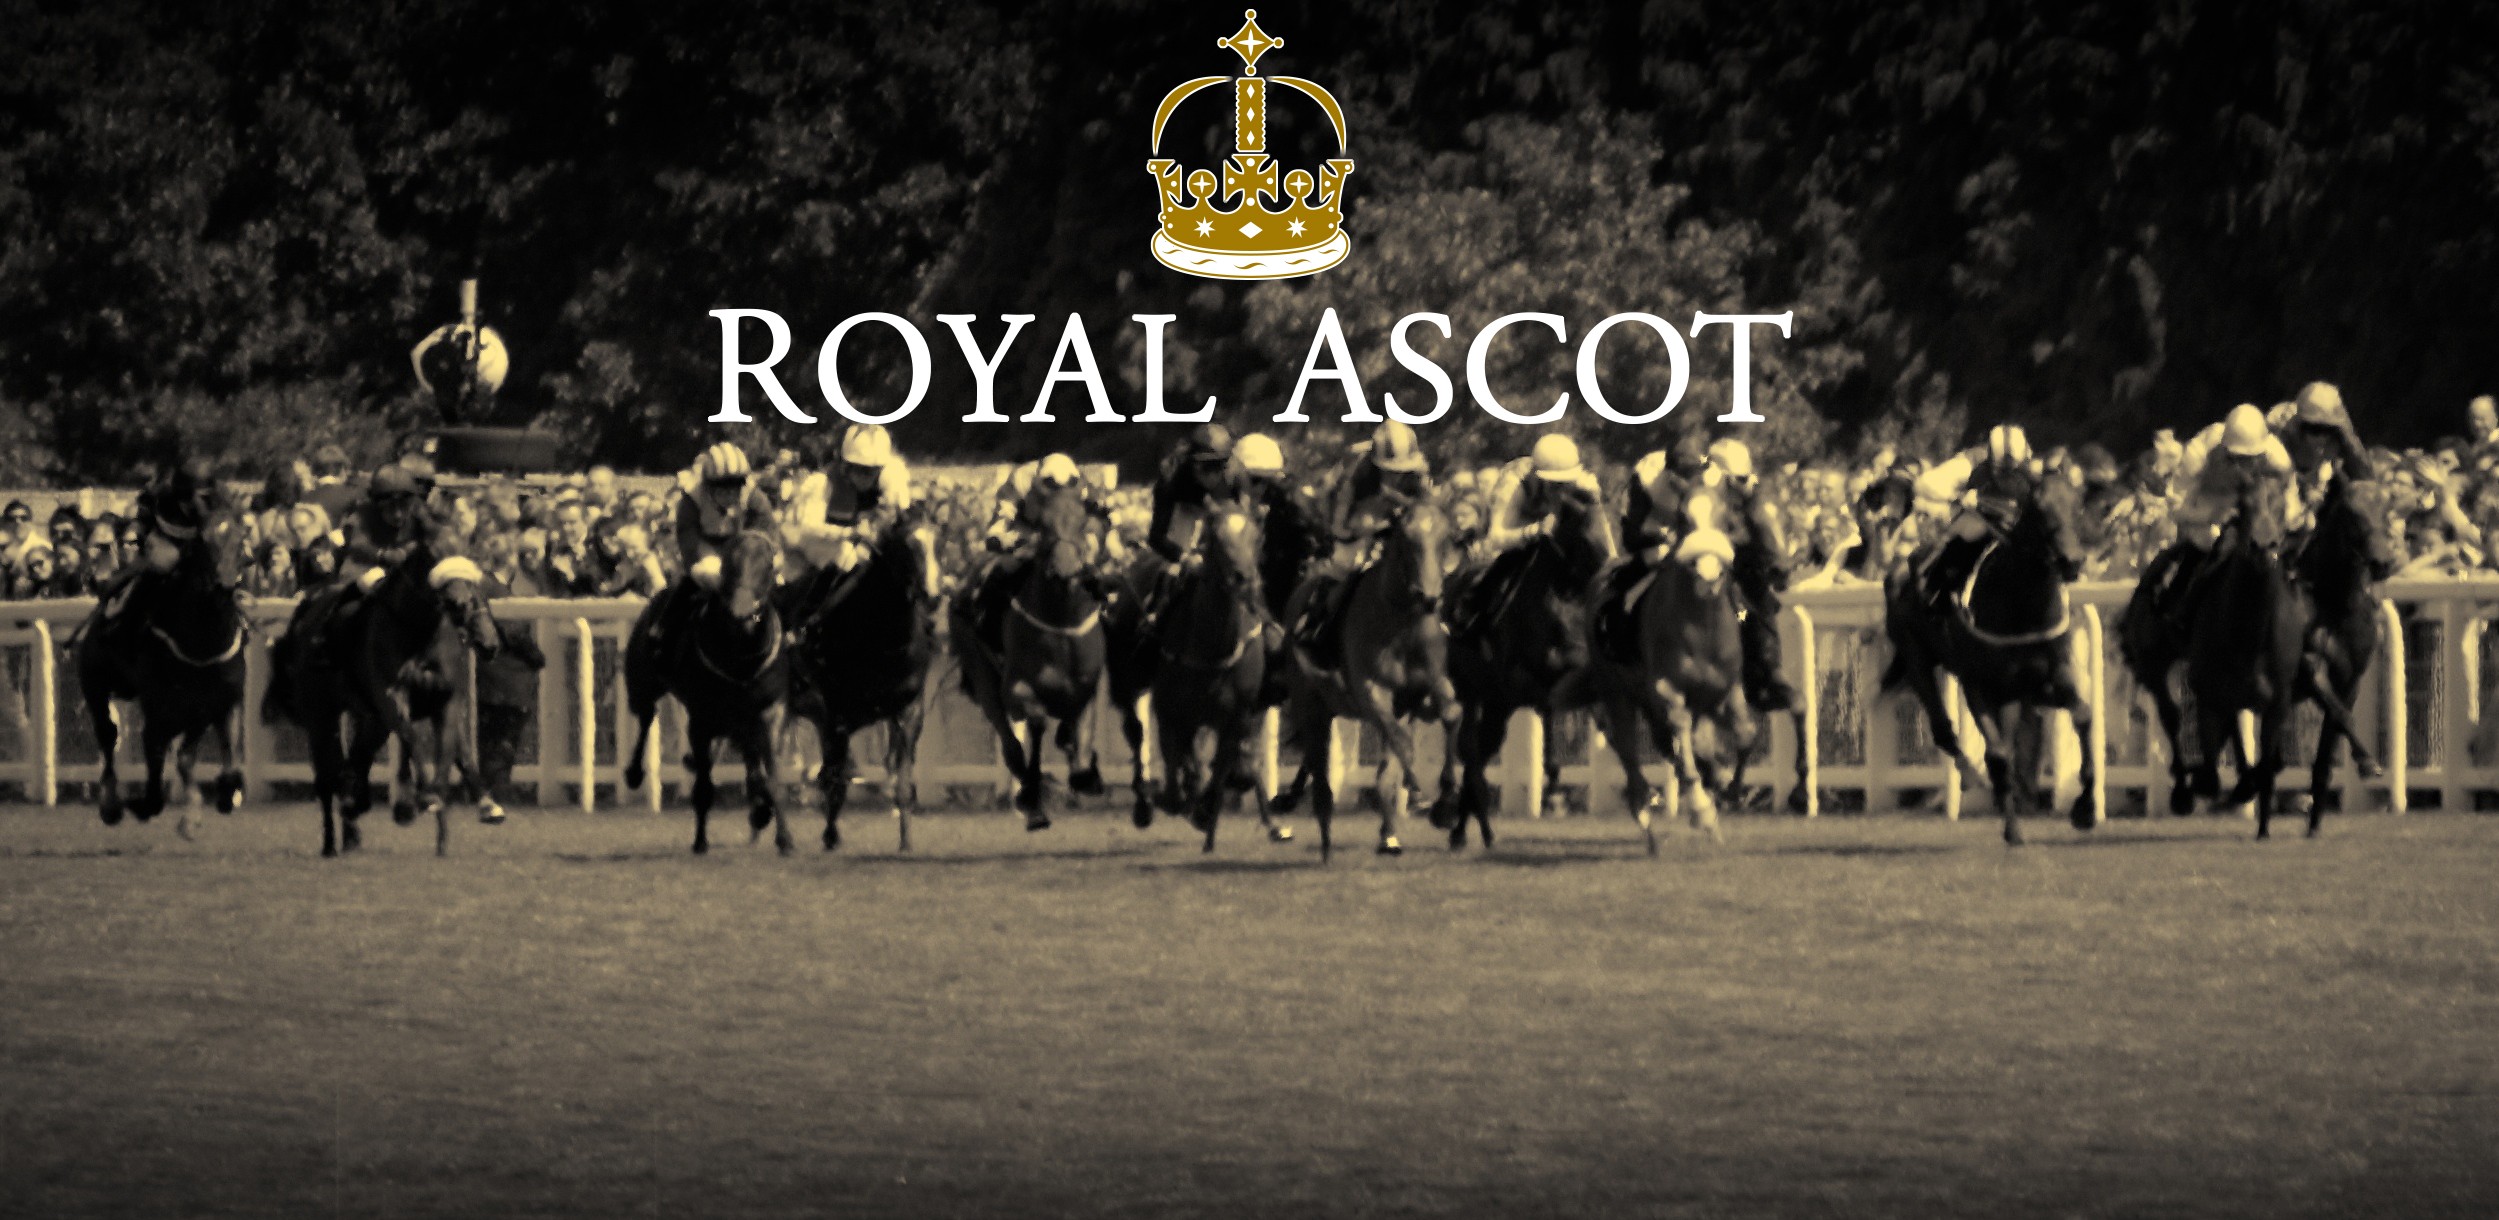 Royal Ascot 2017 – Bankers or Blowouts? - Betting, Trading ...